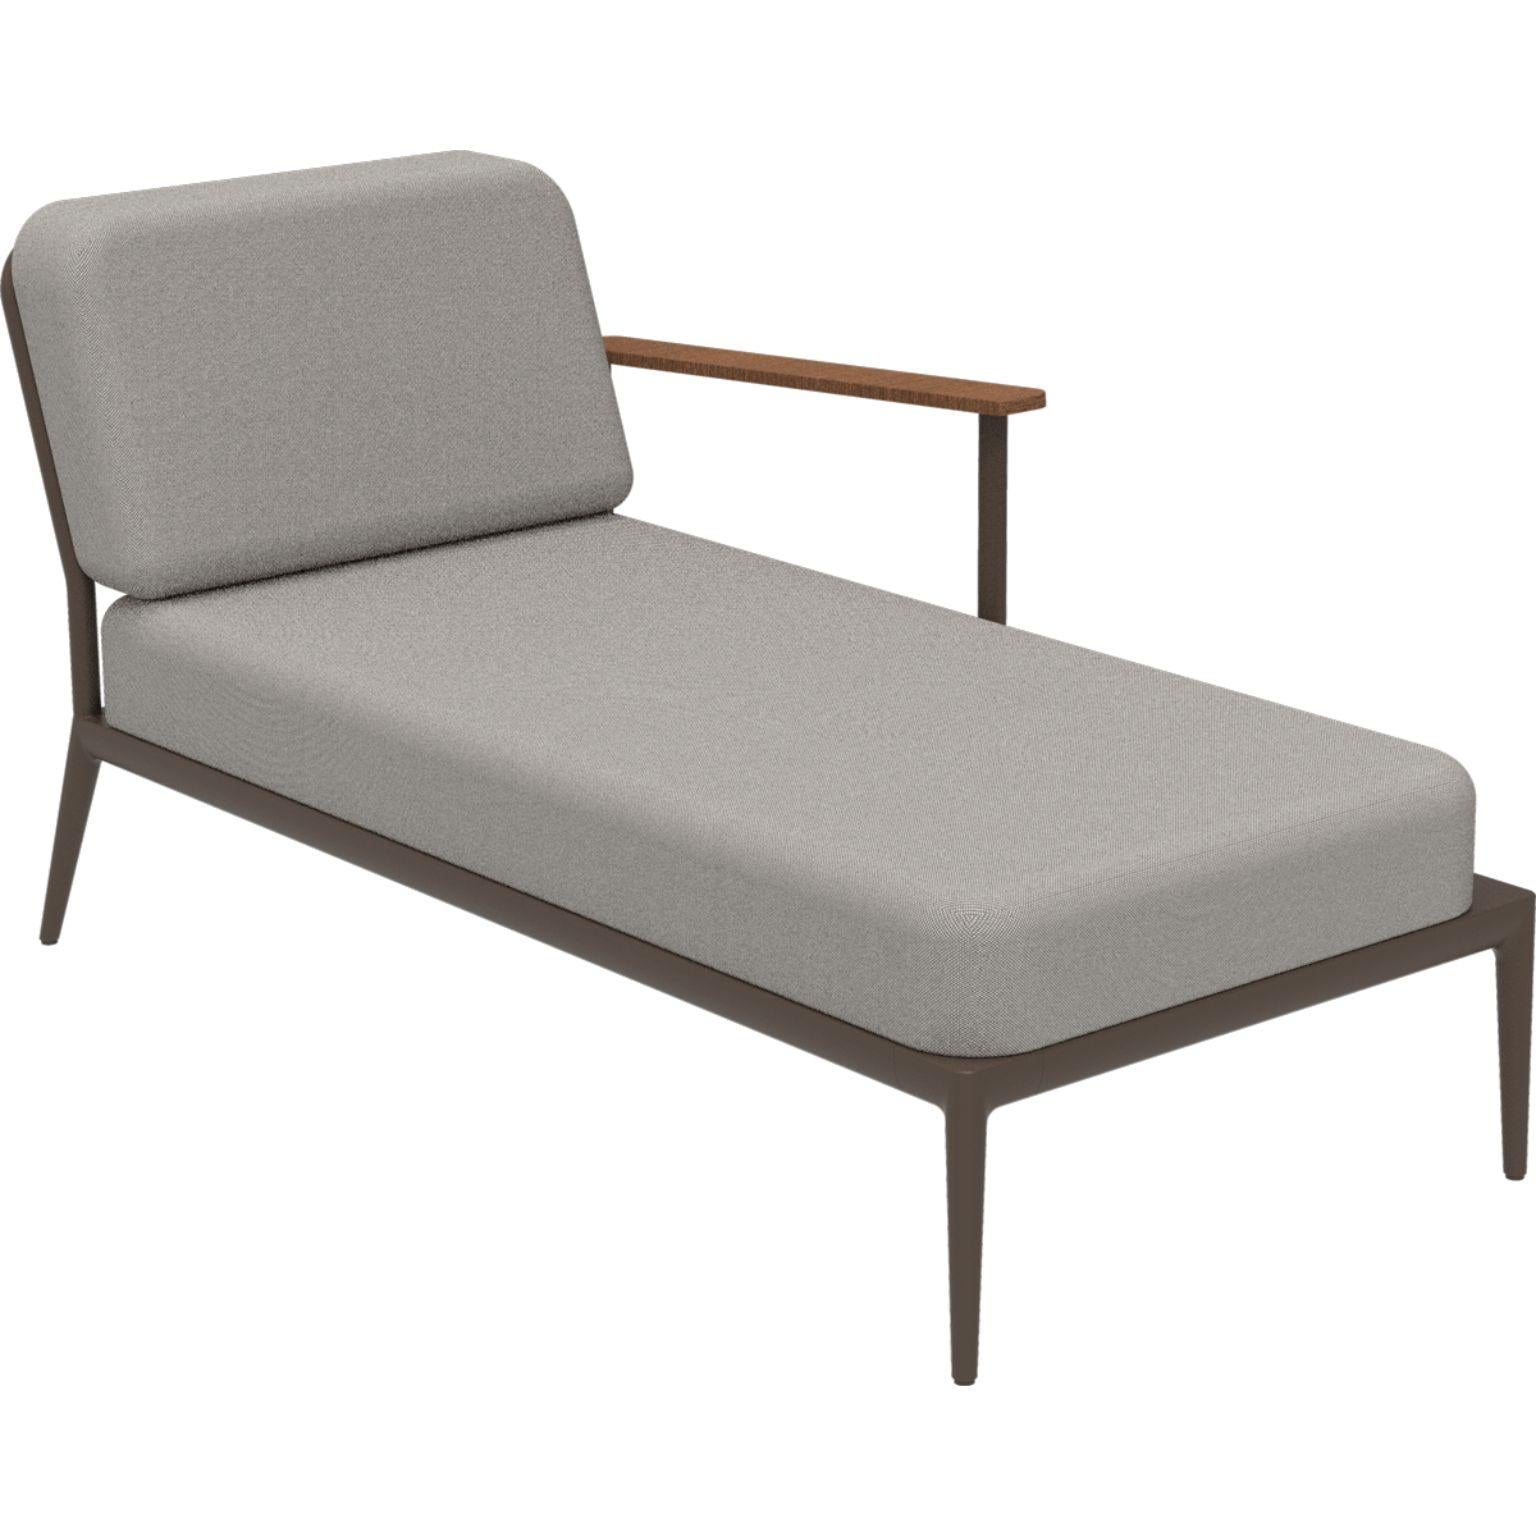 Nature bronze right chaise longue by MOWEE
Dimensions: D155 x W76 x H81 cm (seat height 42 cm).
Material: Aluminum, upholstery and Iroko Wood.
Weight: 28 kg.
Also available in different colors and finishes.

An unmistakable collection for its